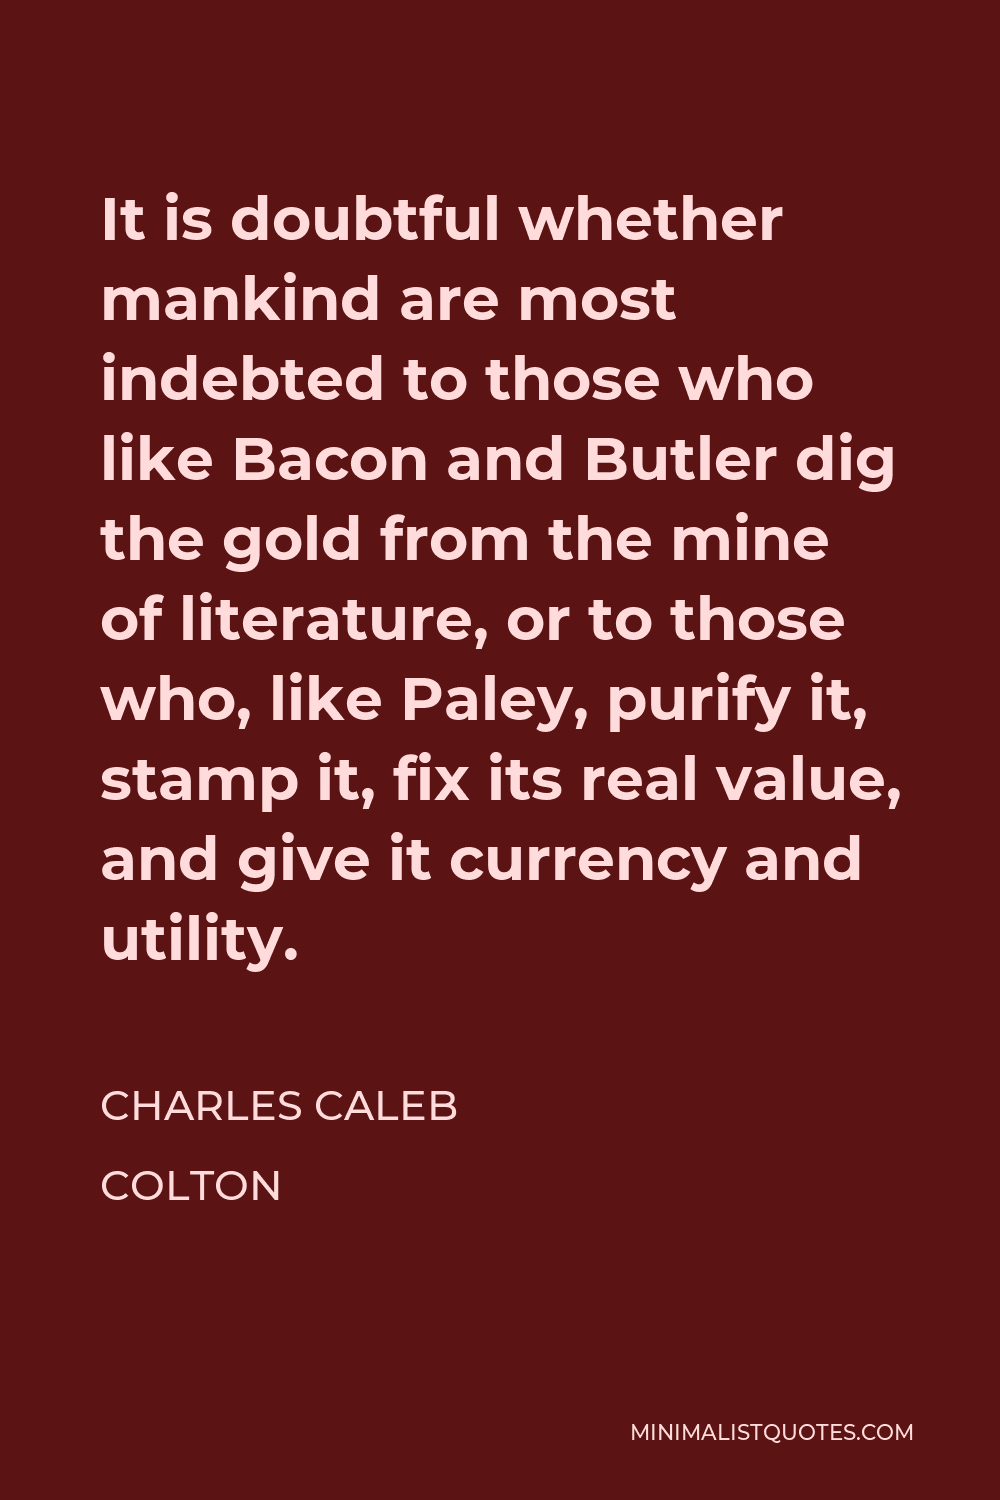 Charles Caleb Colton Quote - It is doubtful whether mankind are most indebted to those who like Bacon and Butler dig the gold from the mine of literature, or to those who, like Paley, purify it, stamp it, fix its real value, and give it currency and utility.